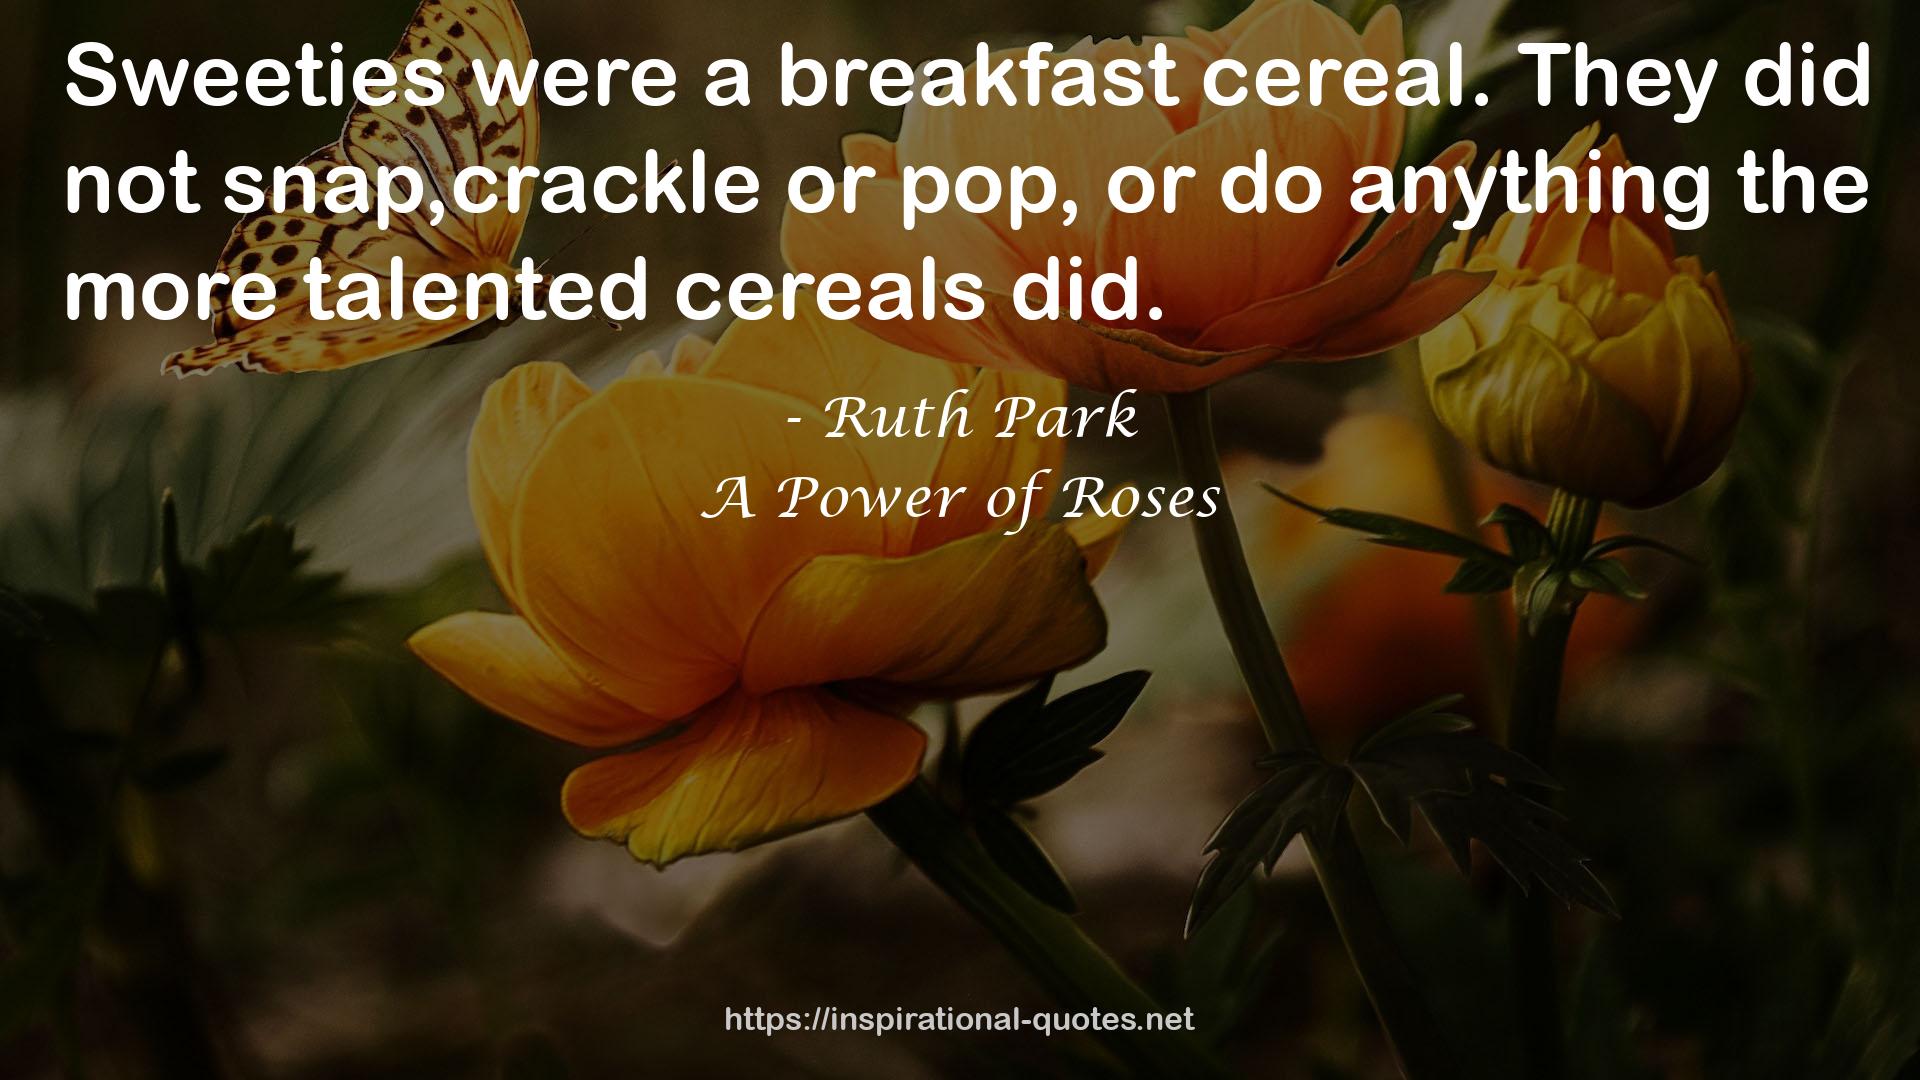 A Power of Roses QUOTES